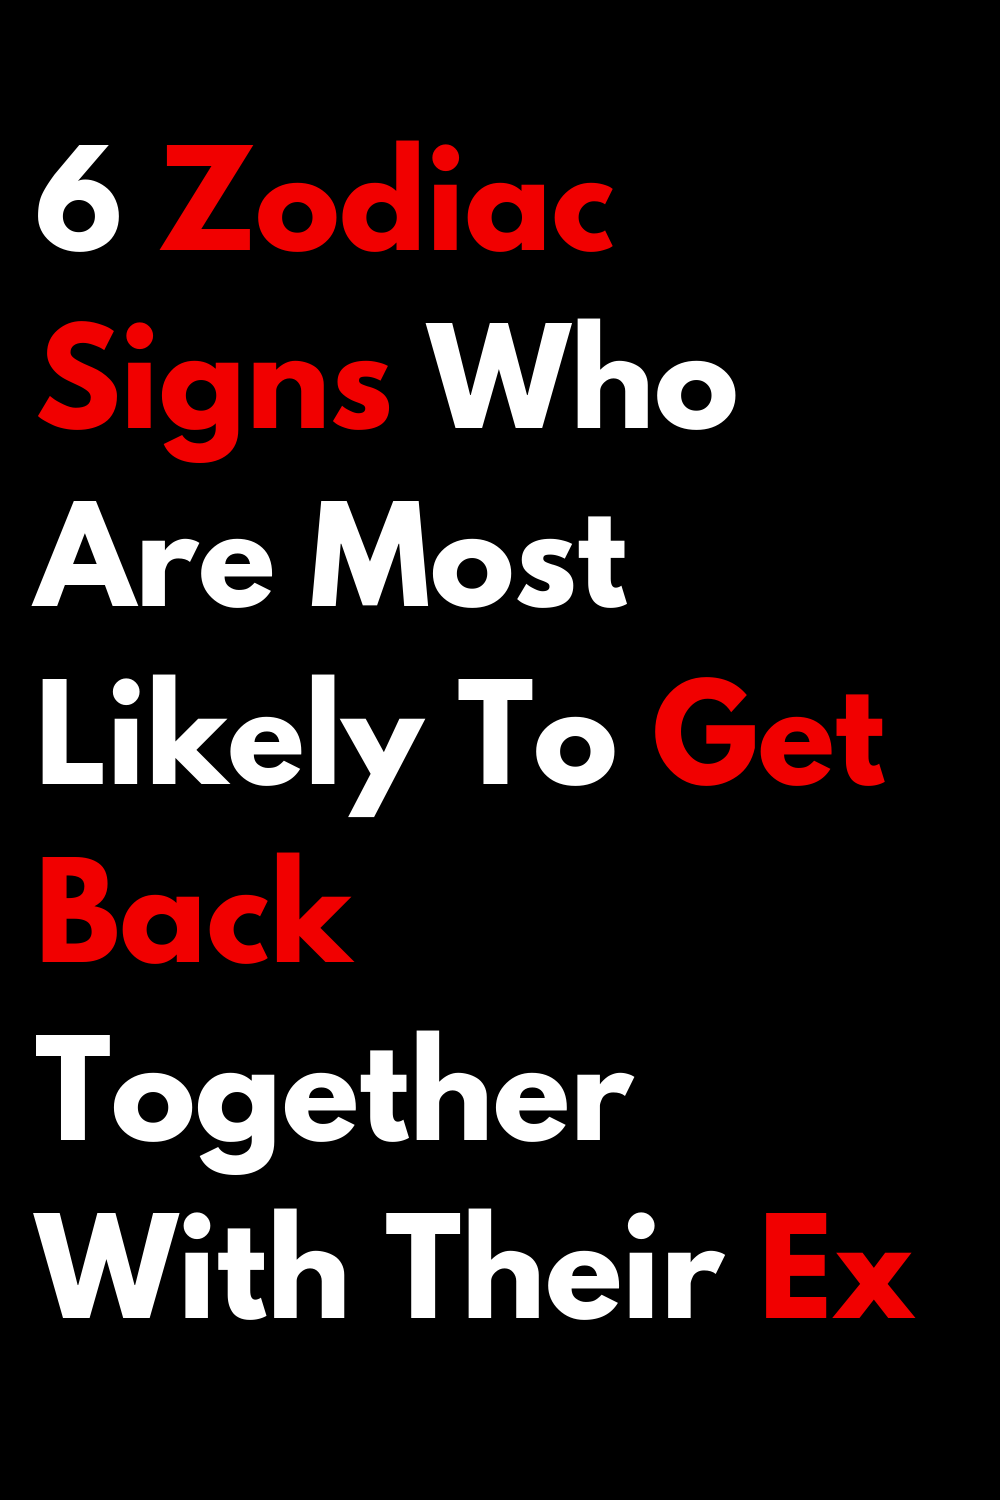 6 Zodiac Signs Who Are Most Likely To Get Back Together With Their Ex